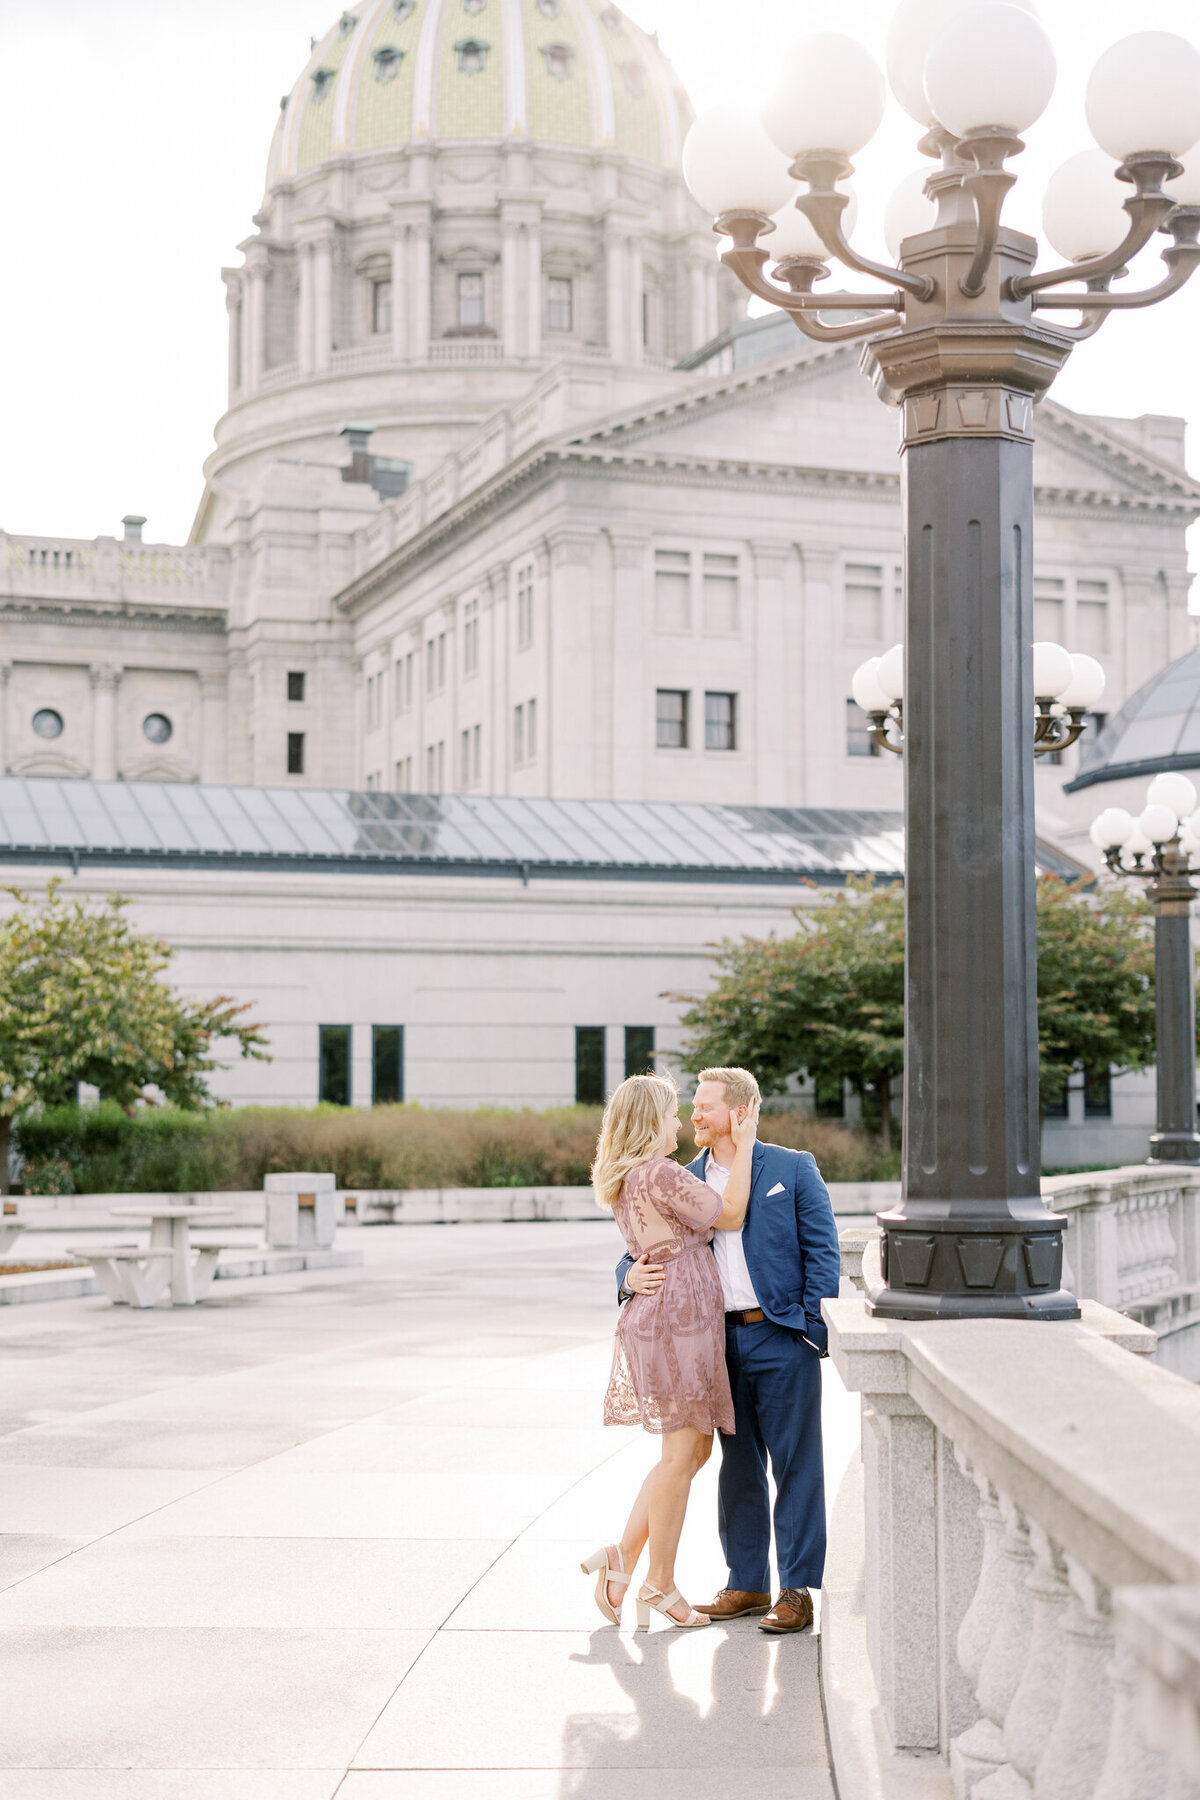 Engagement Photography in Central PA | Ashlee Zimmerman